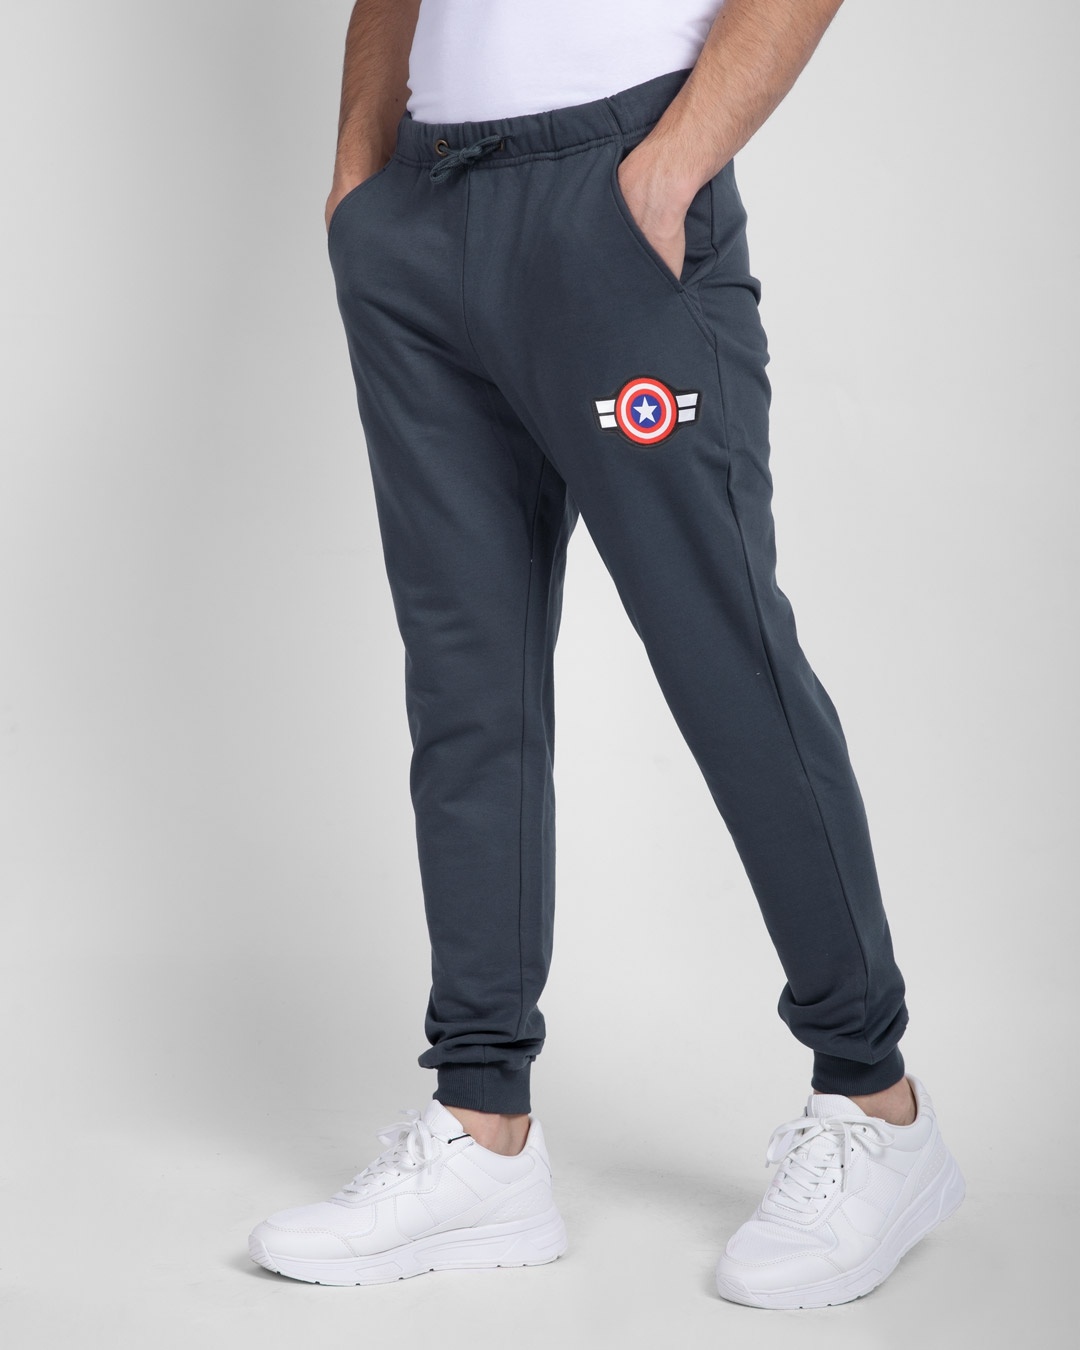 Buy Free Authority Captain America Featured Joggers for Men online